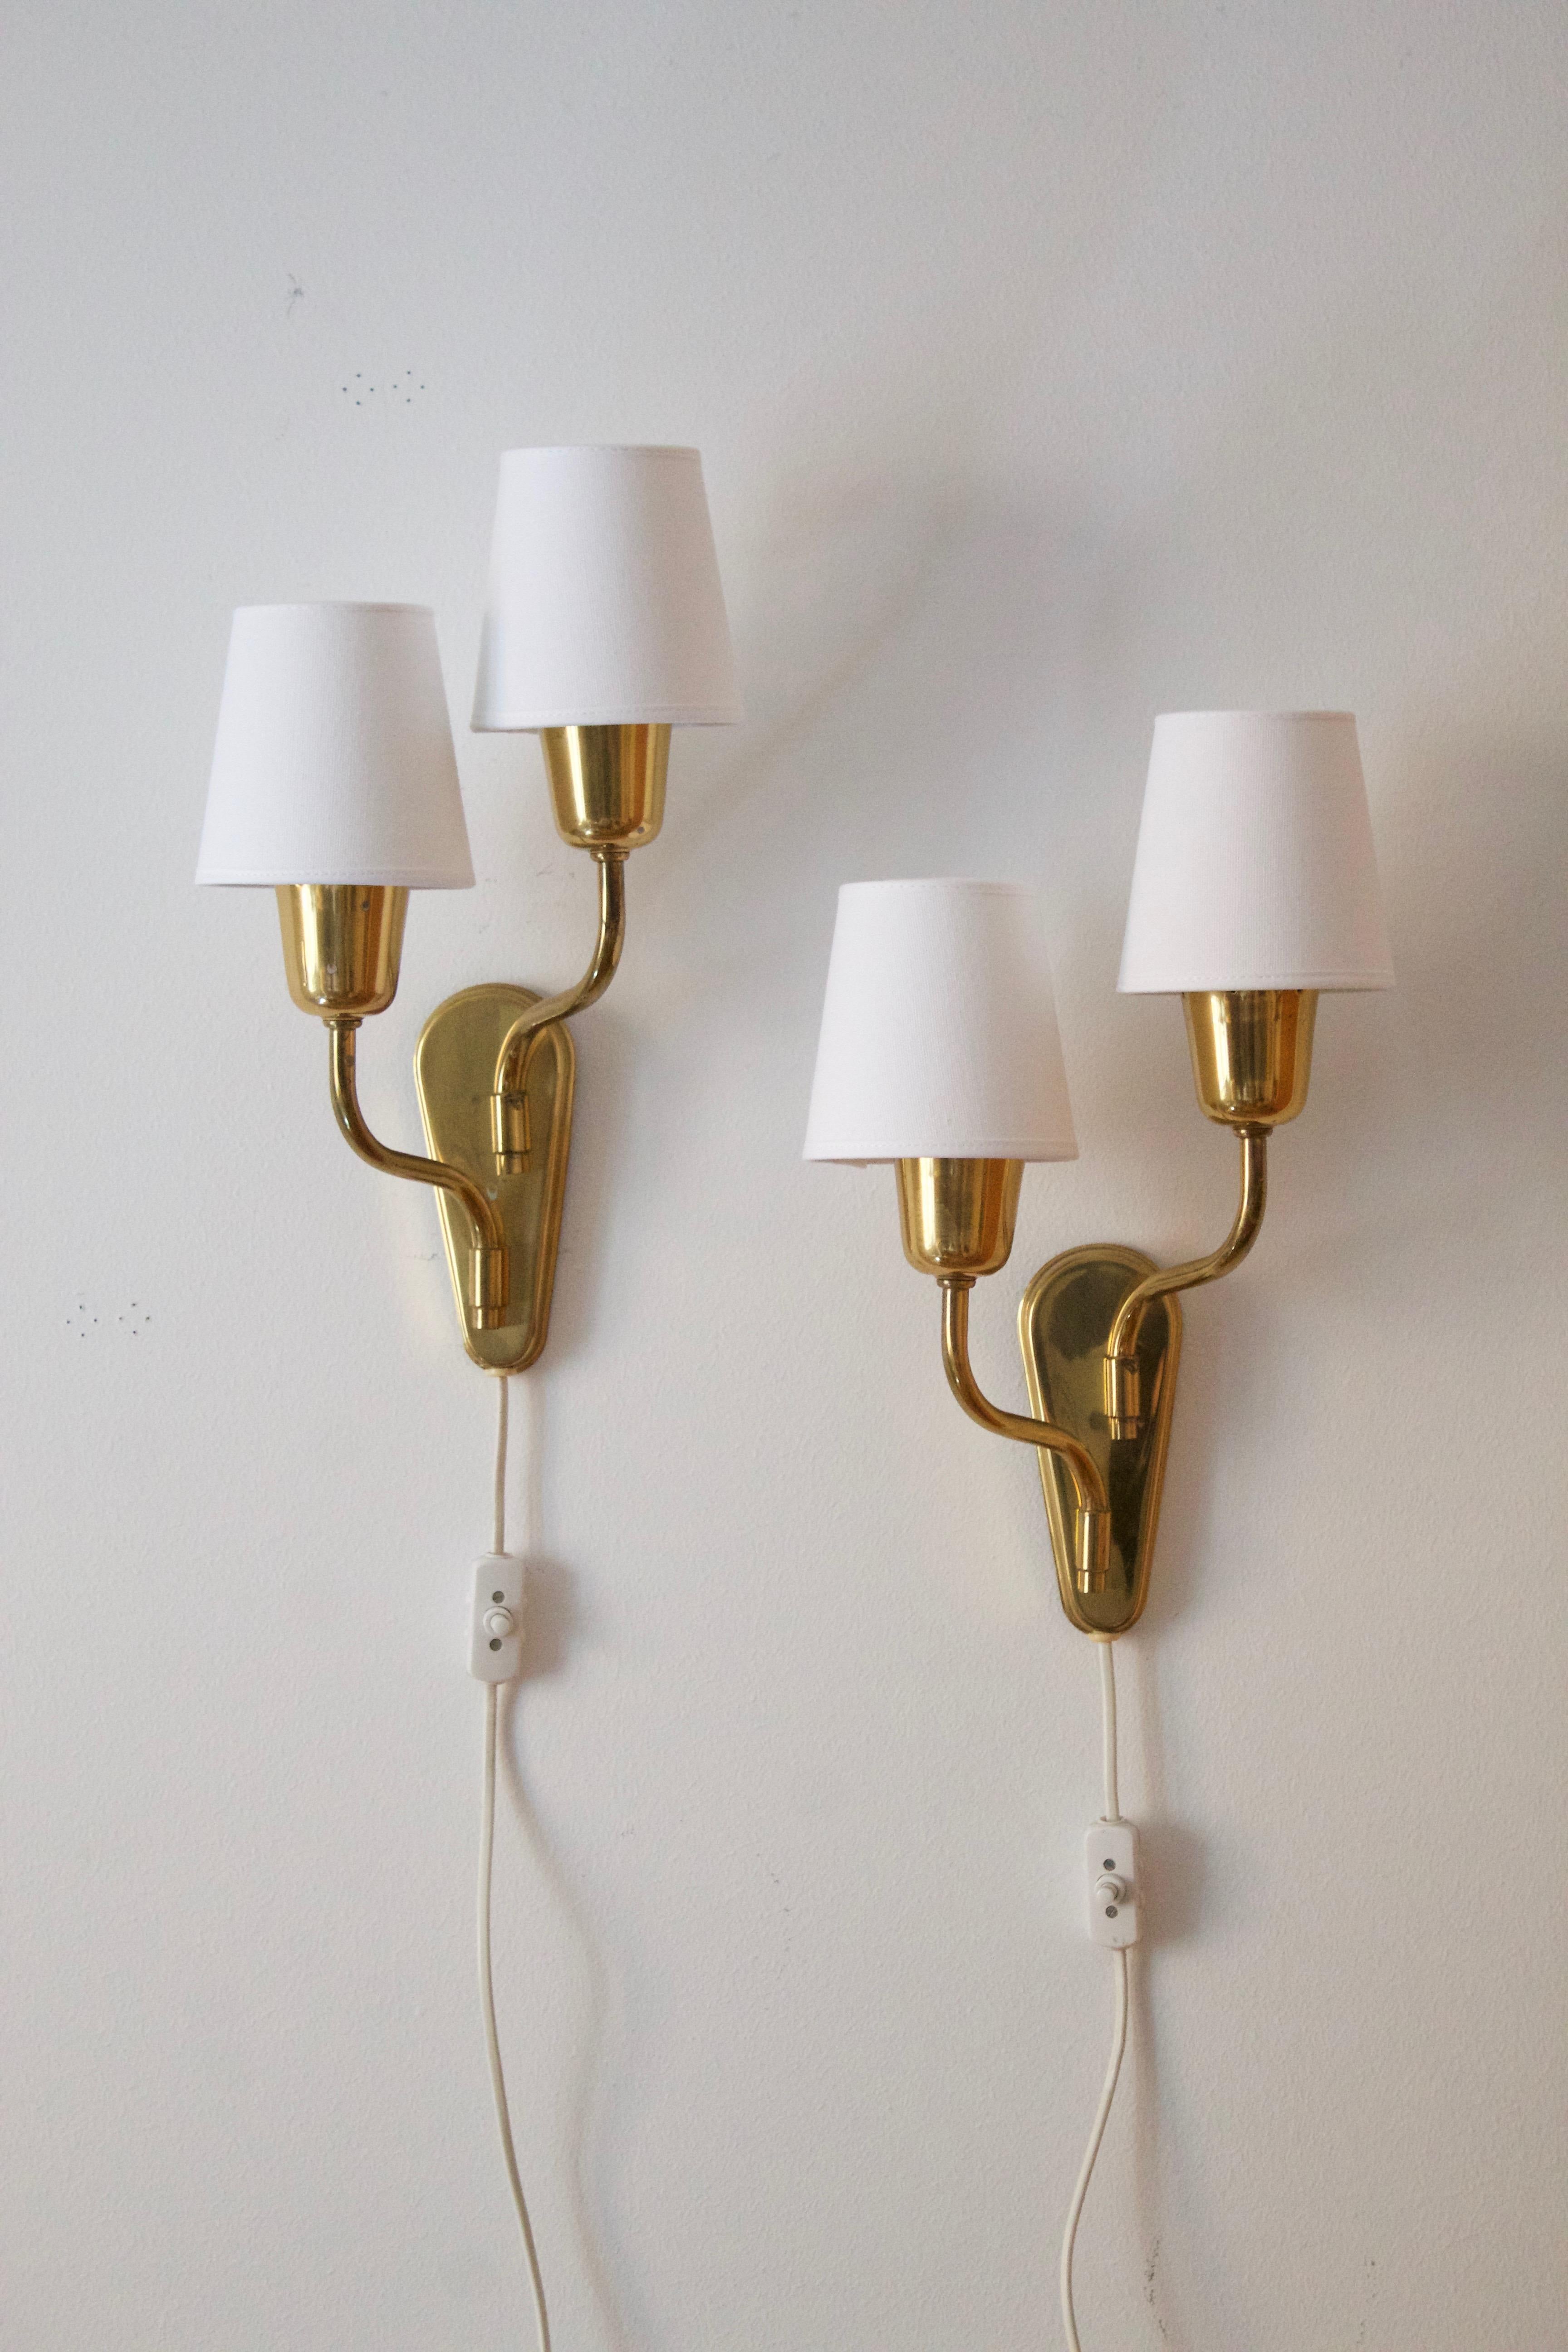 A pair of two armed wall lights / sconces. Designed and produced in Sweden, c. 1950s.

Brand new high-end lampshades.

Other designers of the period include Paavo Tynell, Jean Royère, Hans Bergström, Hans-Agne Jakobsson, and Kaare Klint.